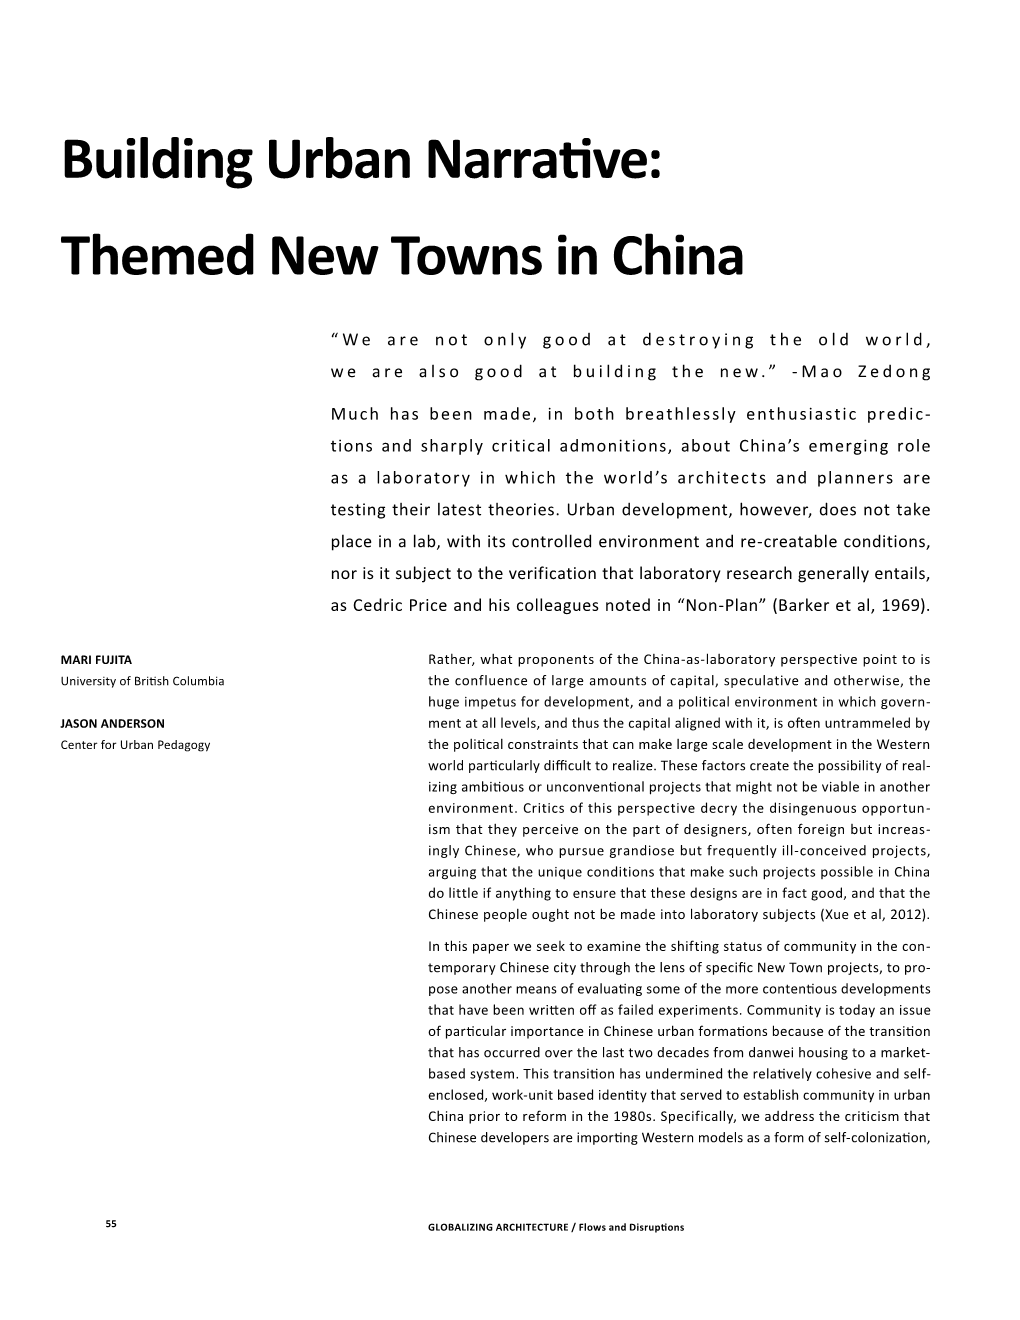 Building Urban Narrative: Themed New Towns in China